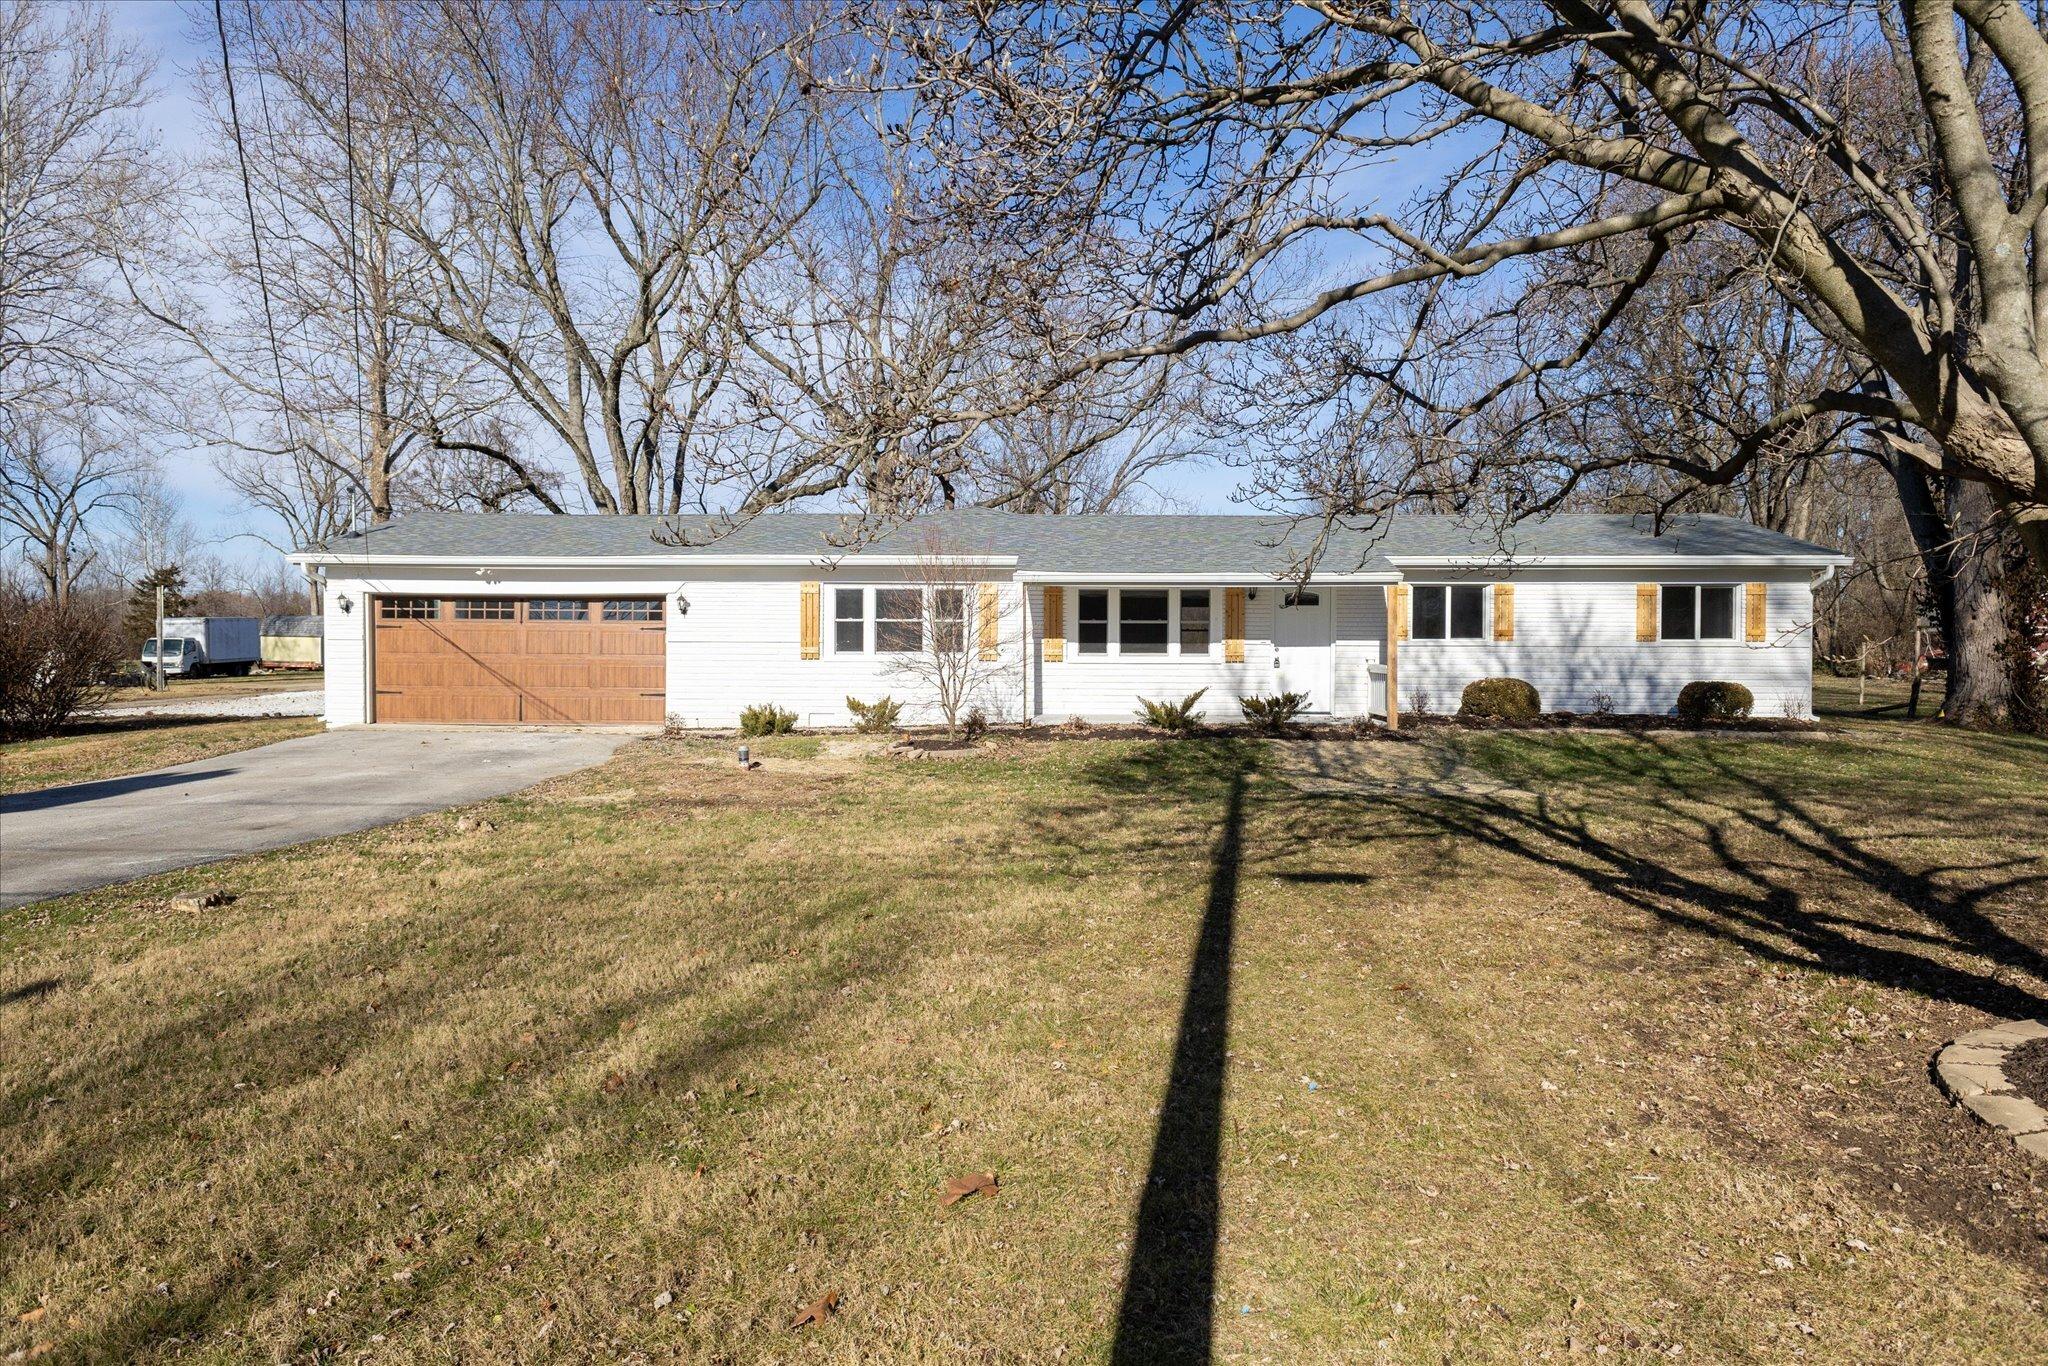 Photo one of 5556 Powell Rd Indianapolis IN 46221 | MLS 21957739